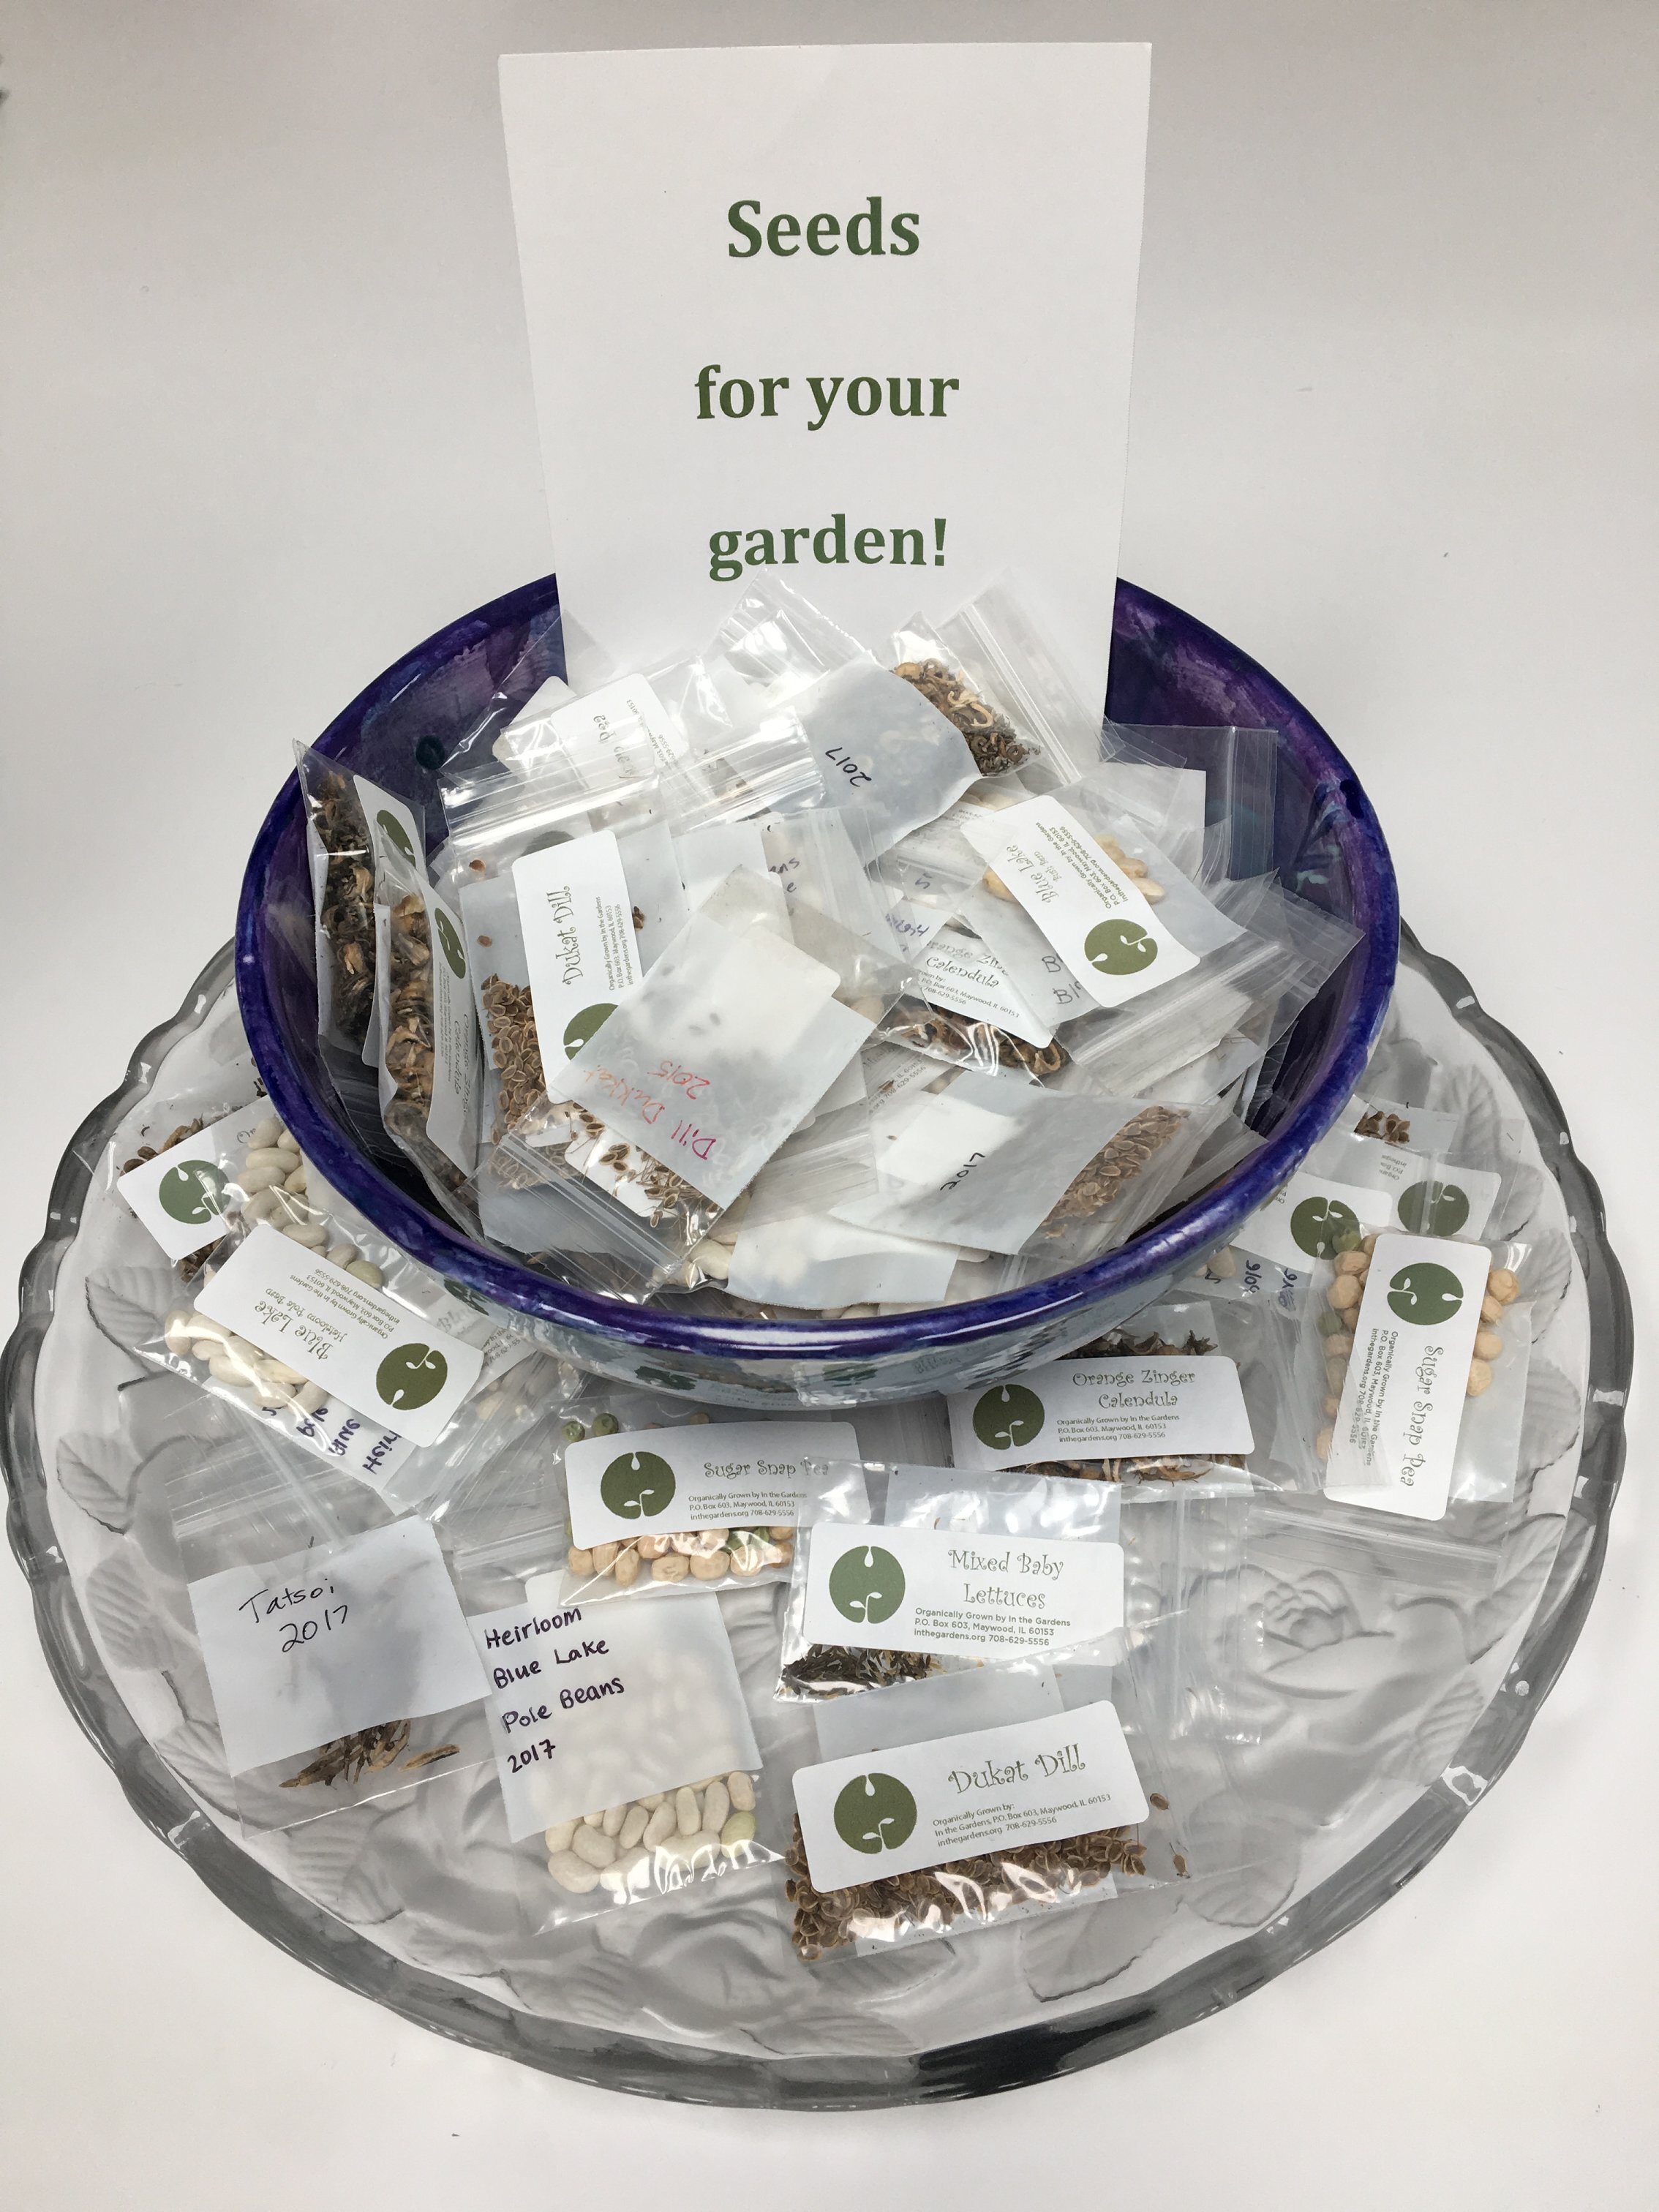  The 2017 In the Gardens stock of saved seeds. 